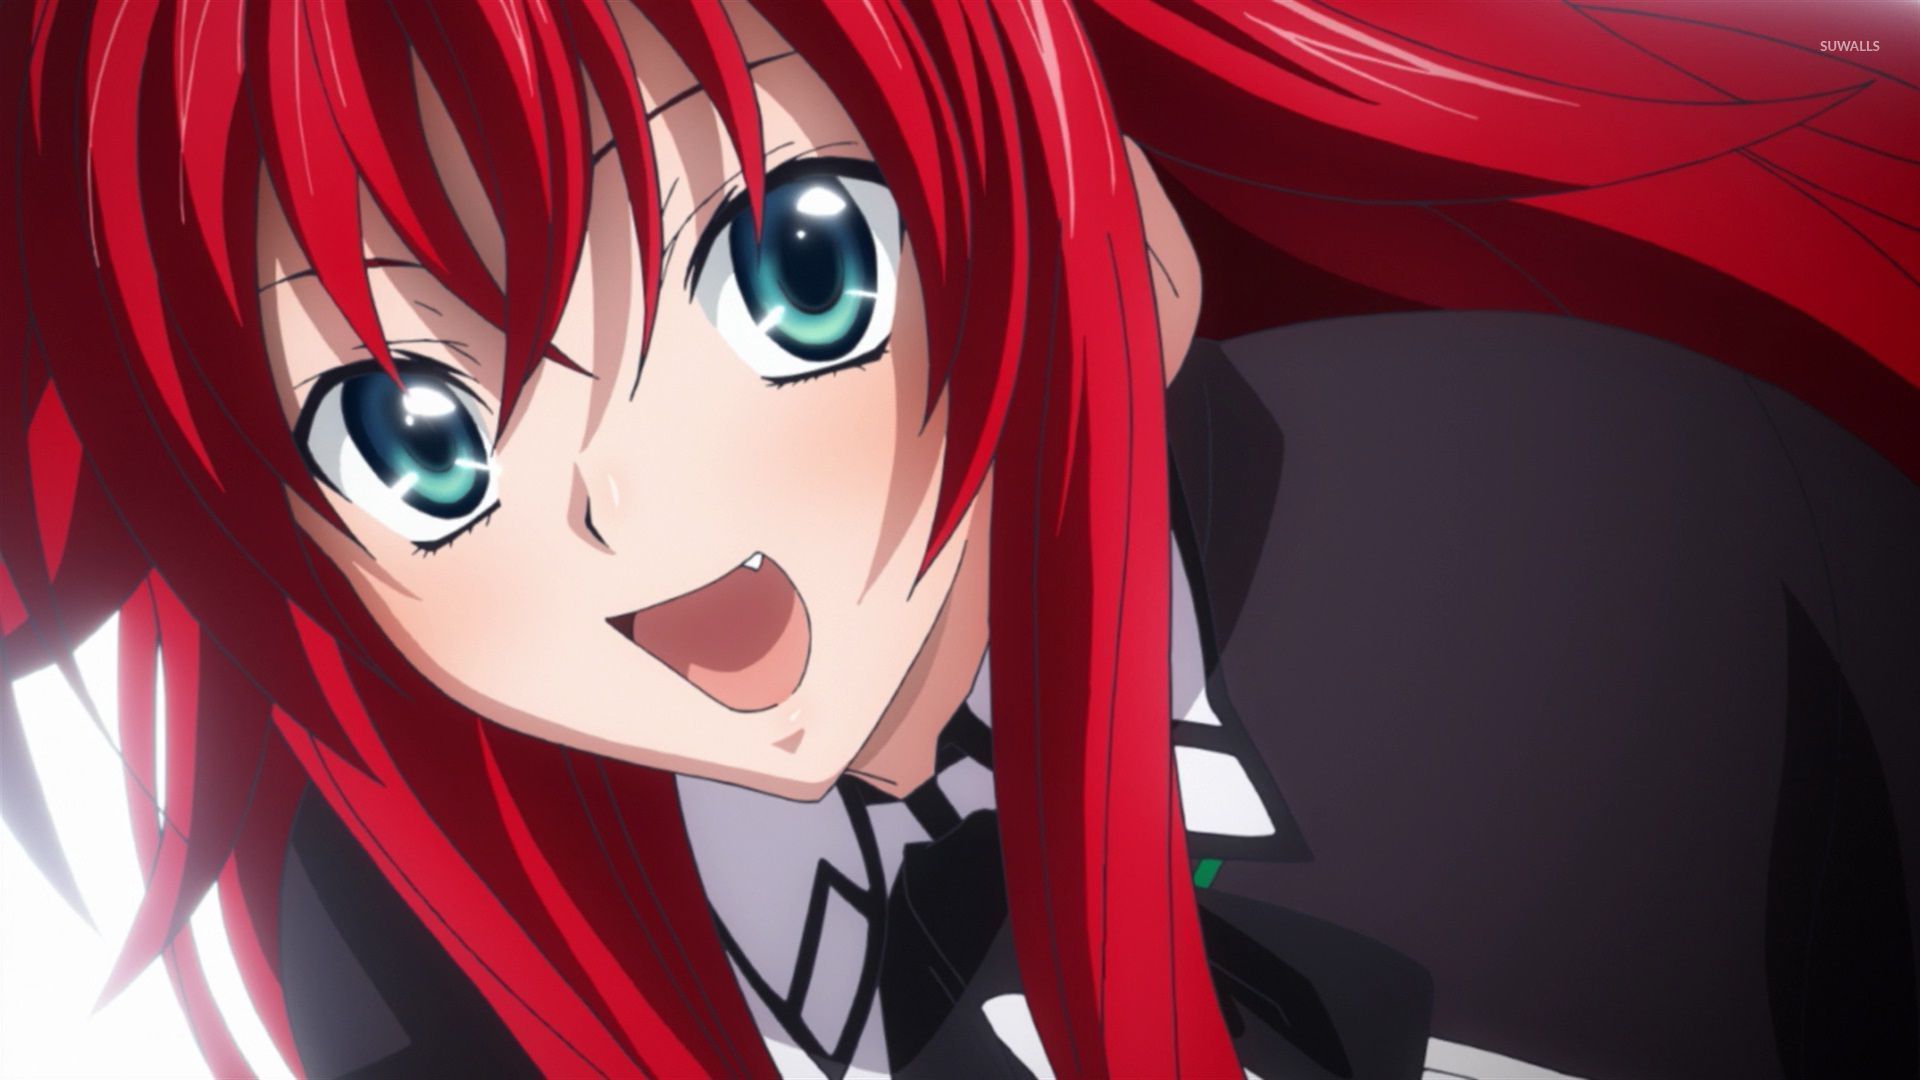 Rias Gremory Wallpapers